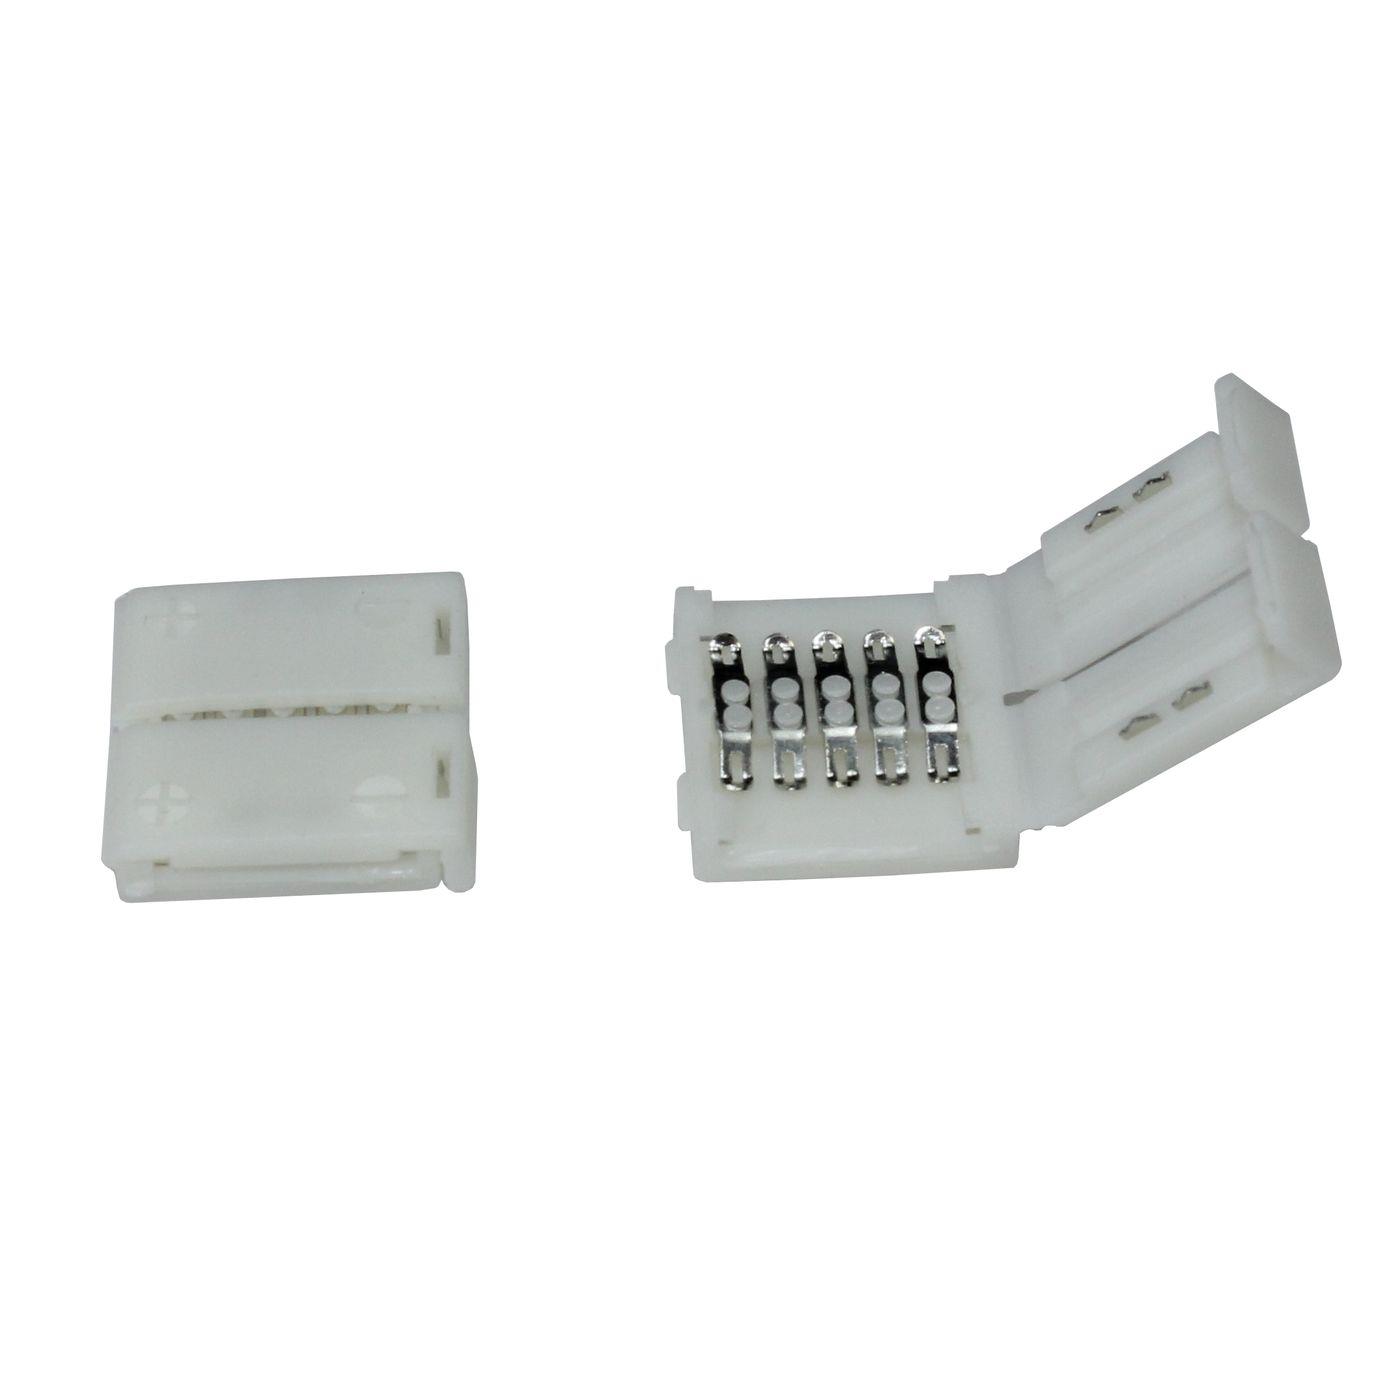 RGBW LED Clip Connector for 12mm RGBW LED Strip 17x5mm